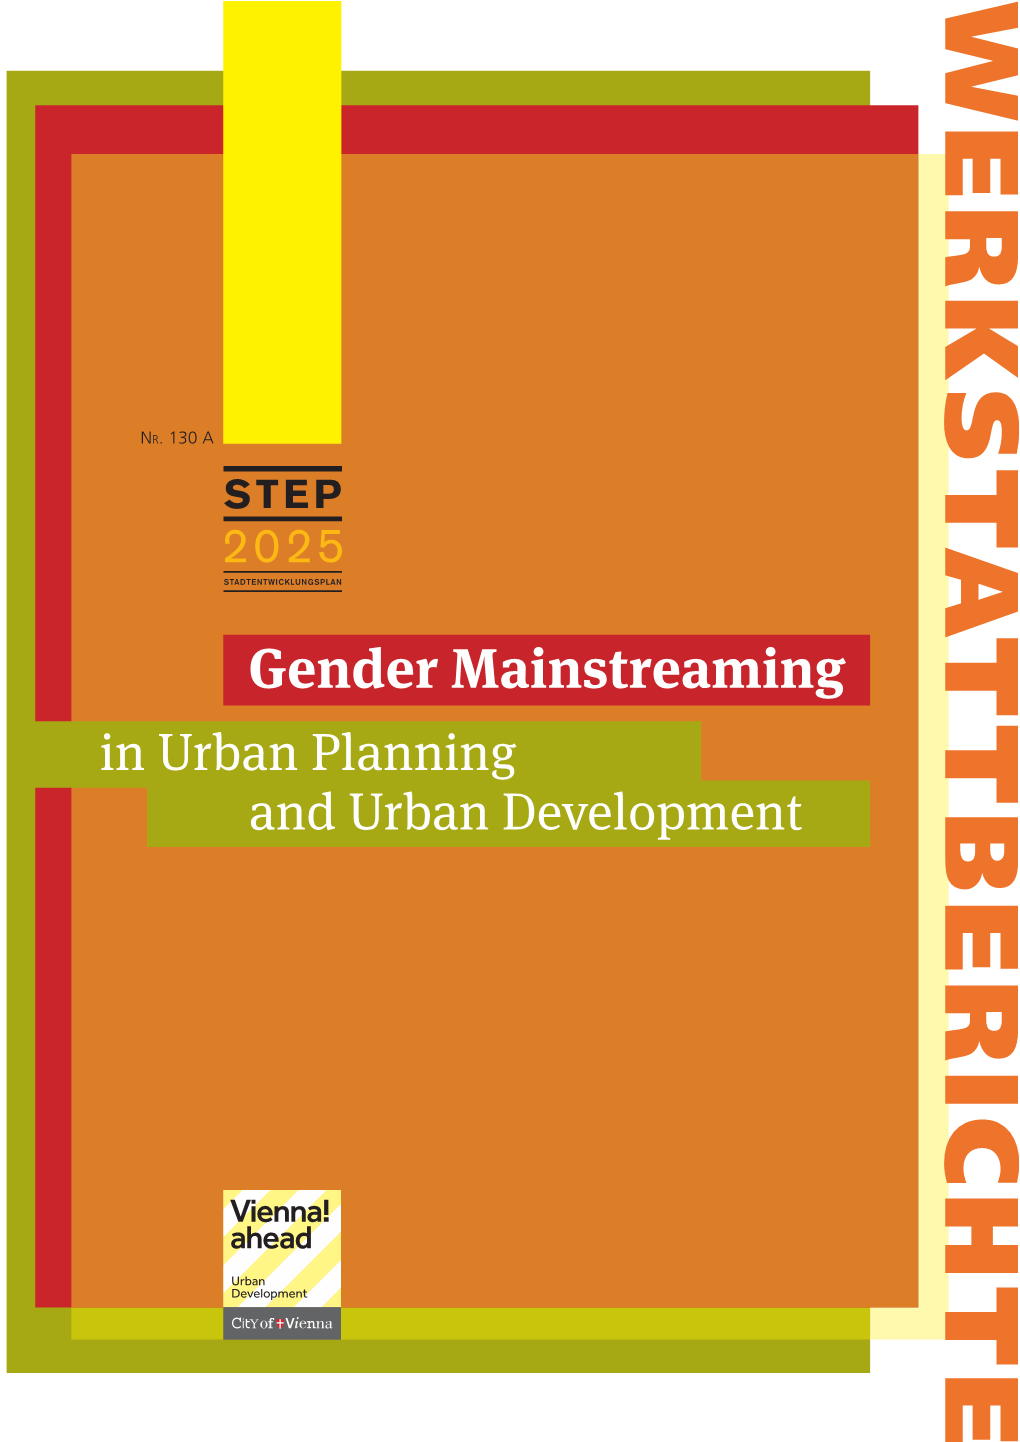 Manual for Gender Mainstreaming in Urban Planning and Urban Development